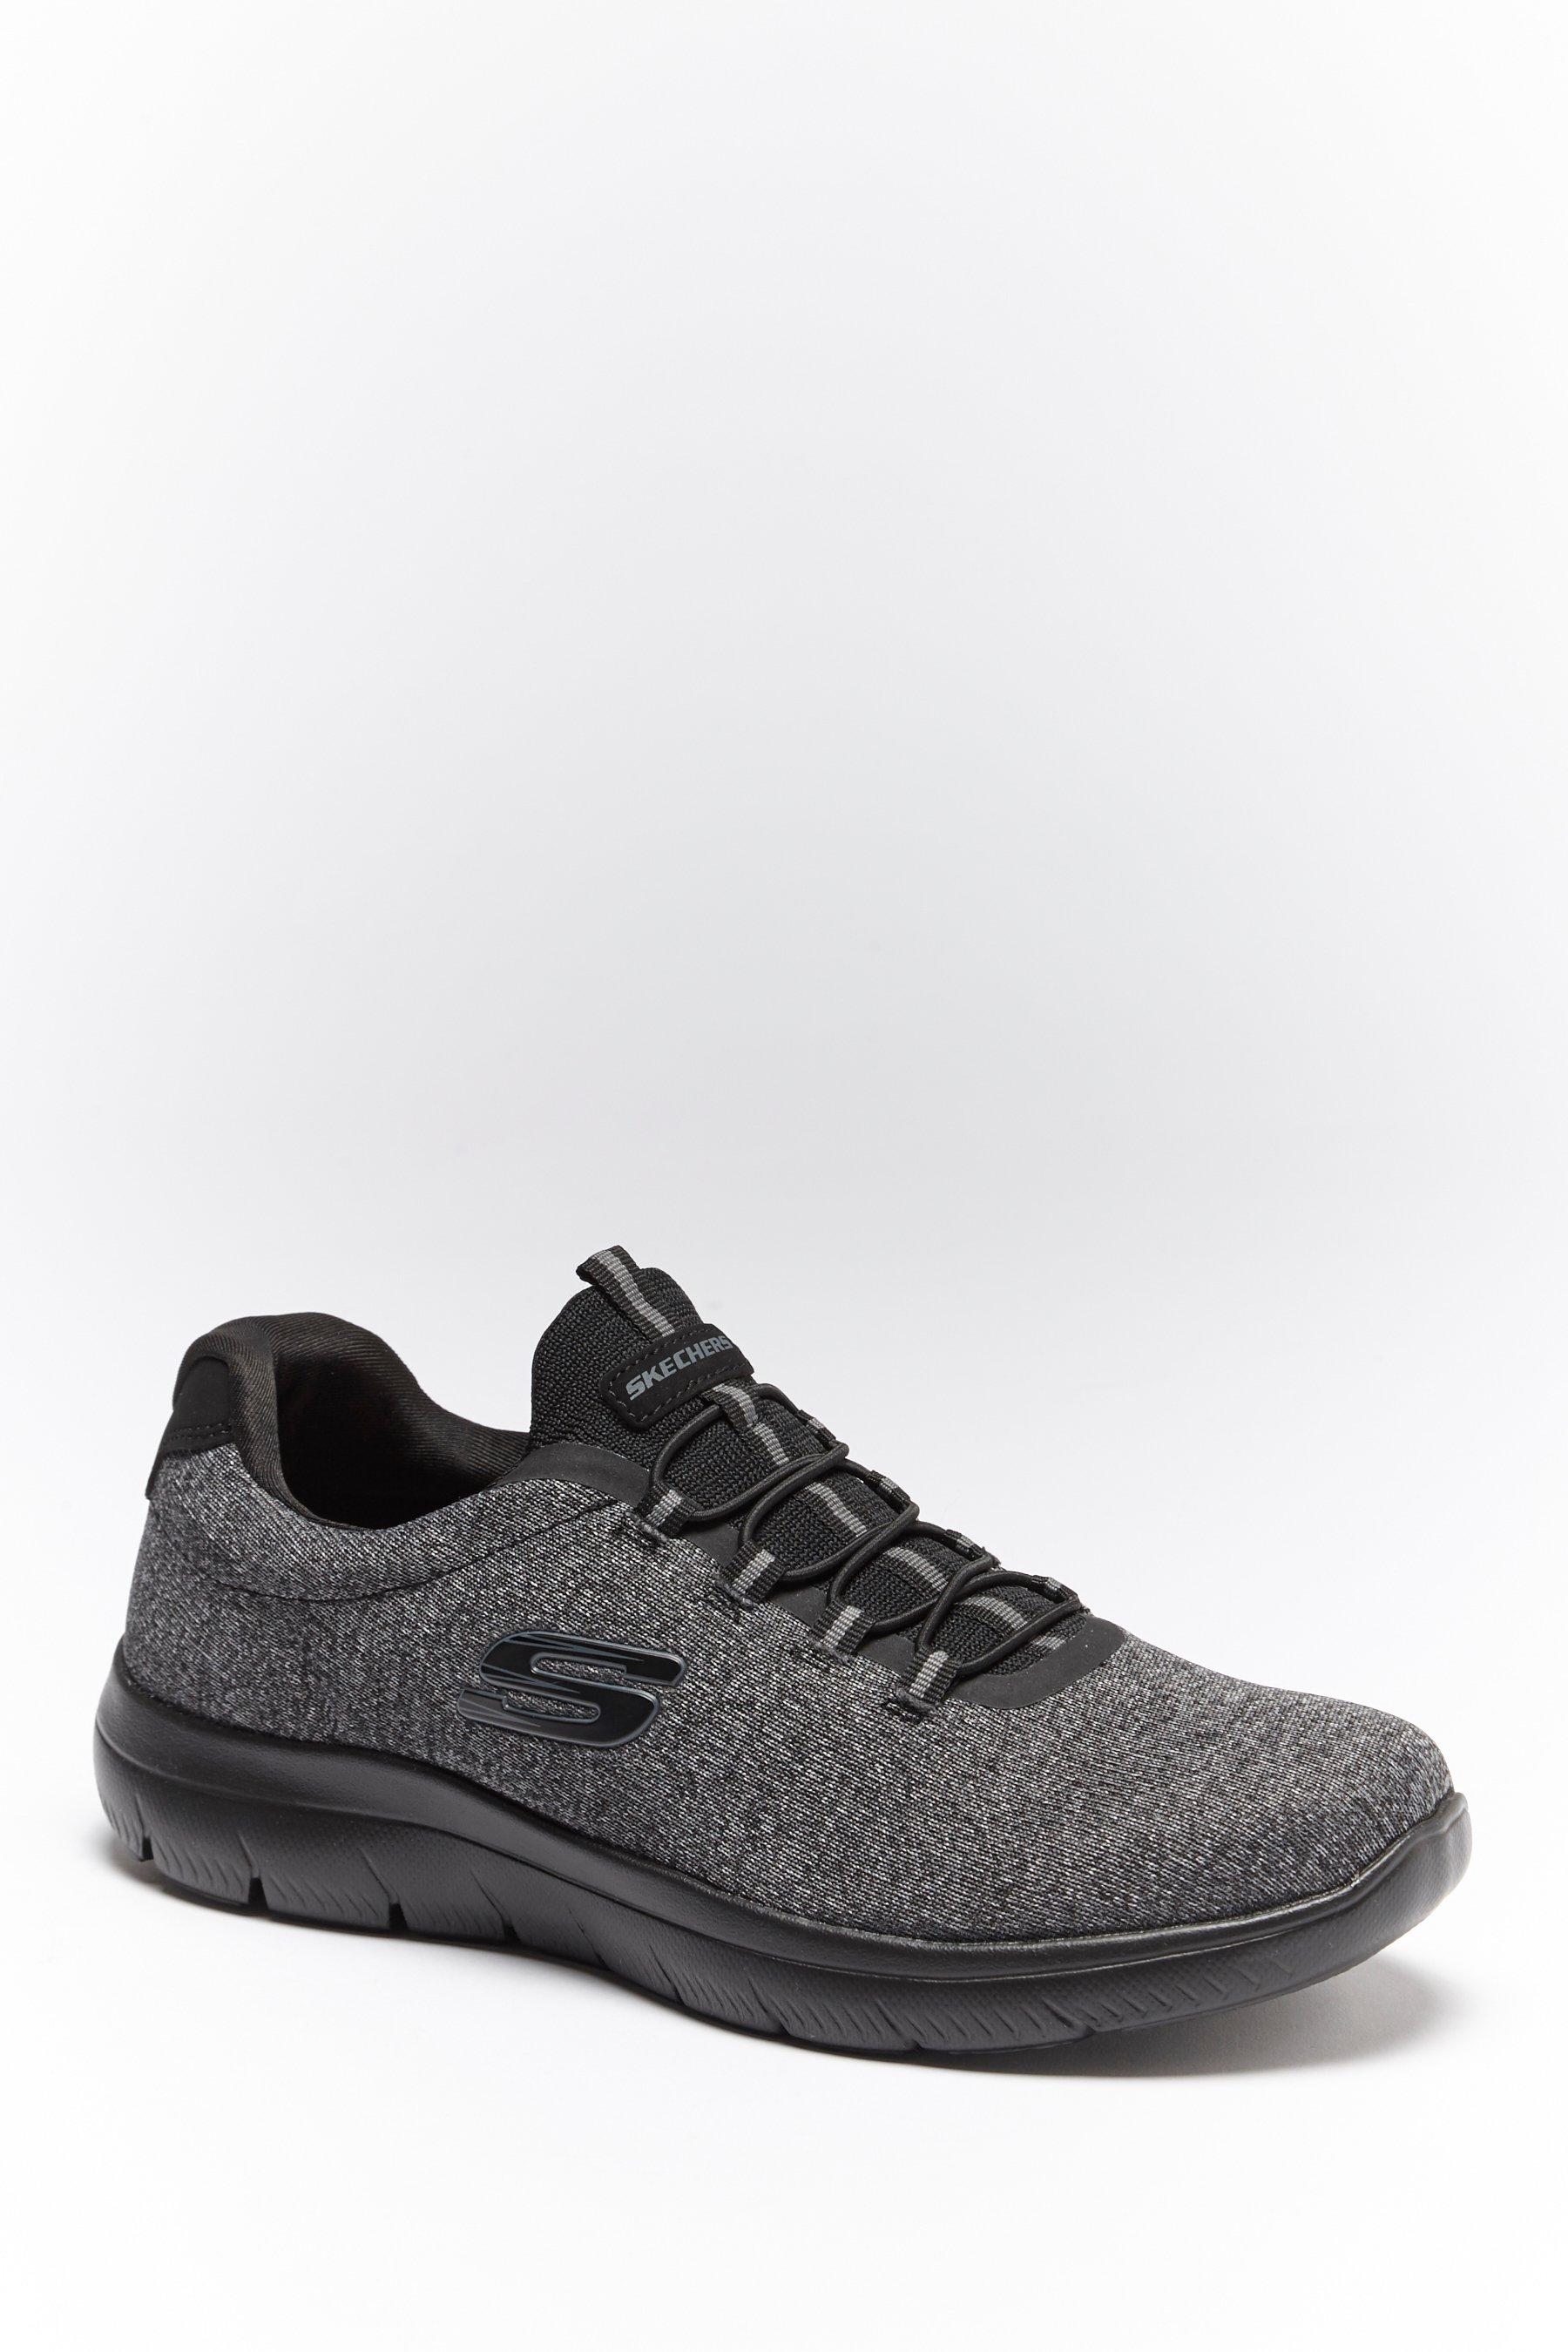 Skechers Summits Bungee Lace Trainers 